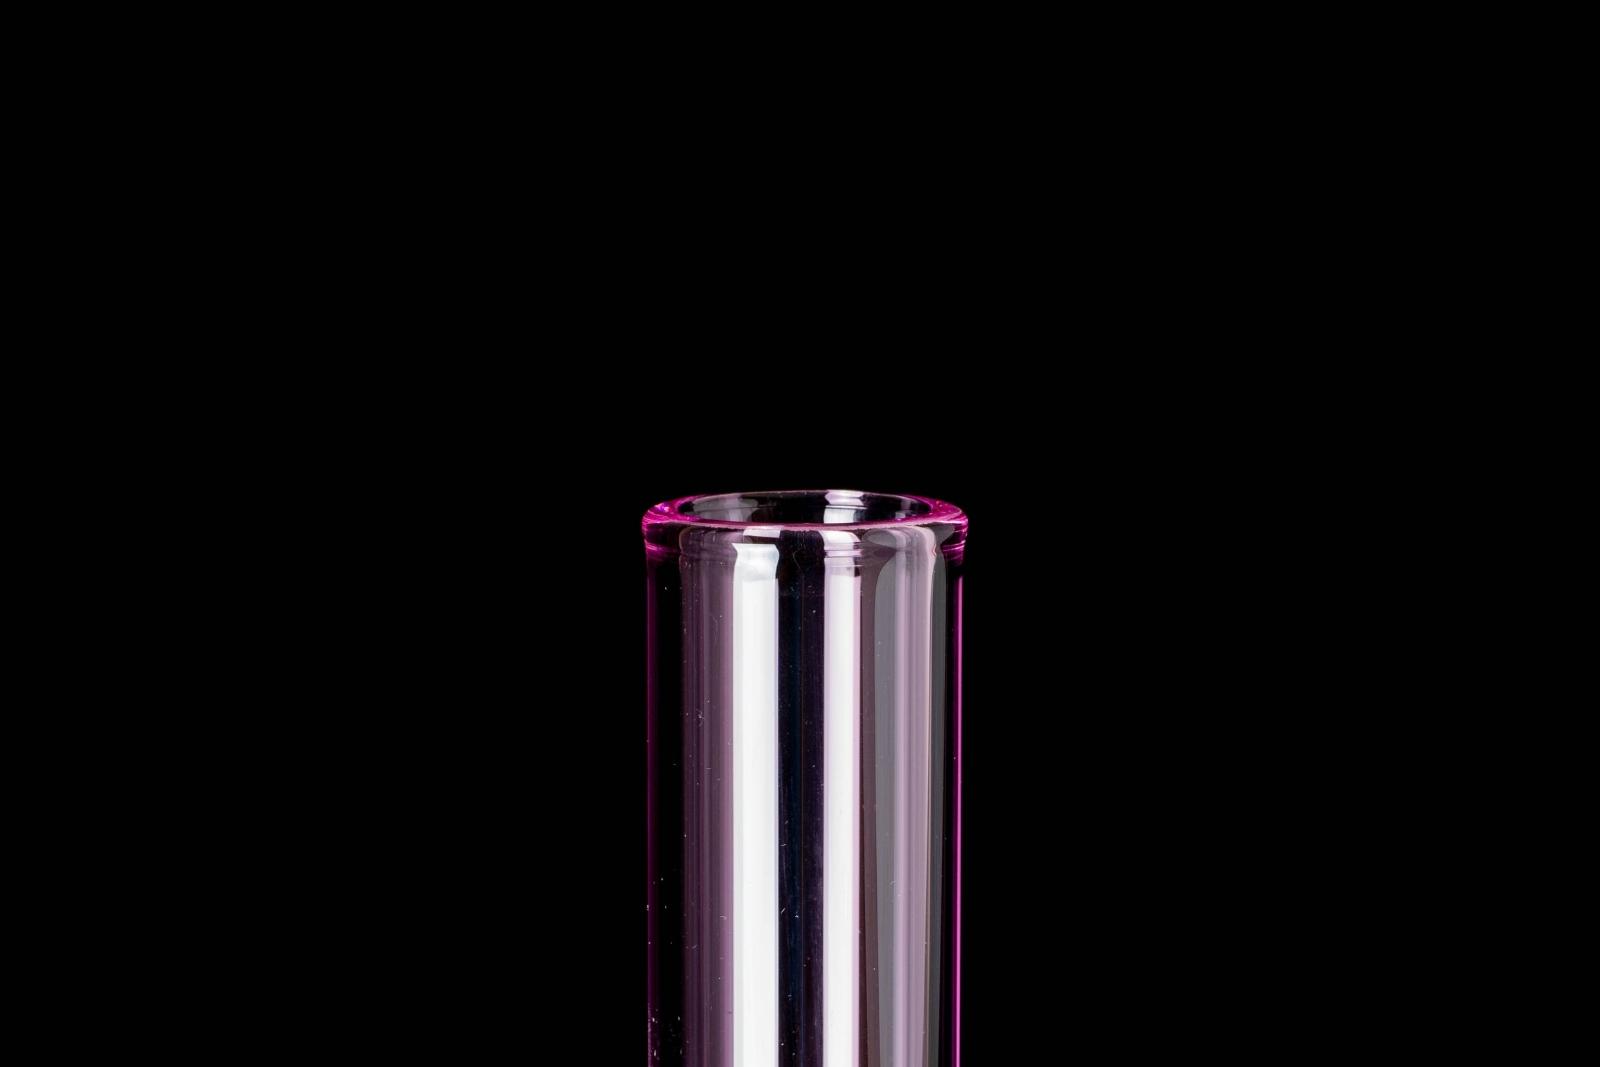 A pink, 12-inch straight tube, made by Jack Glass Co., on a black background